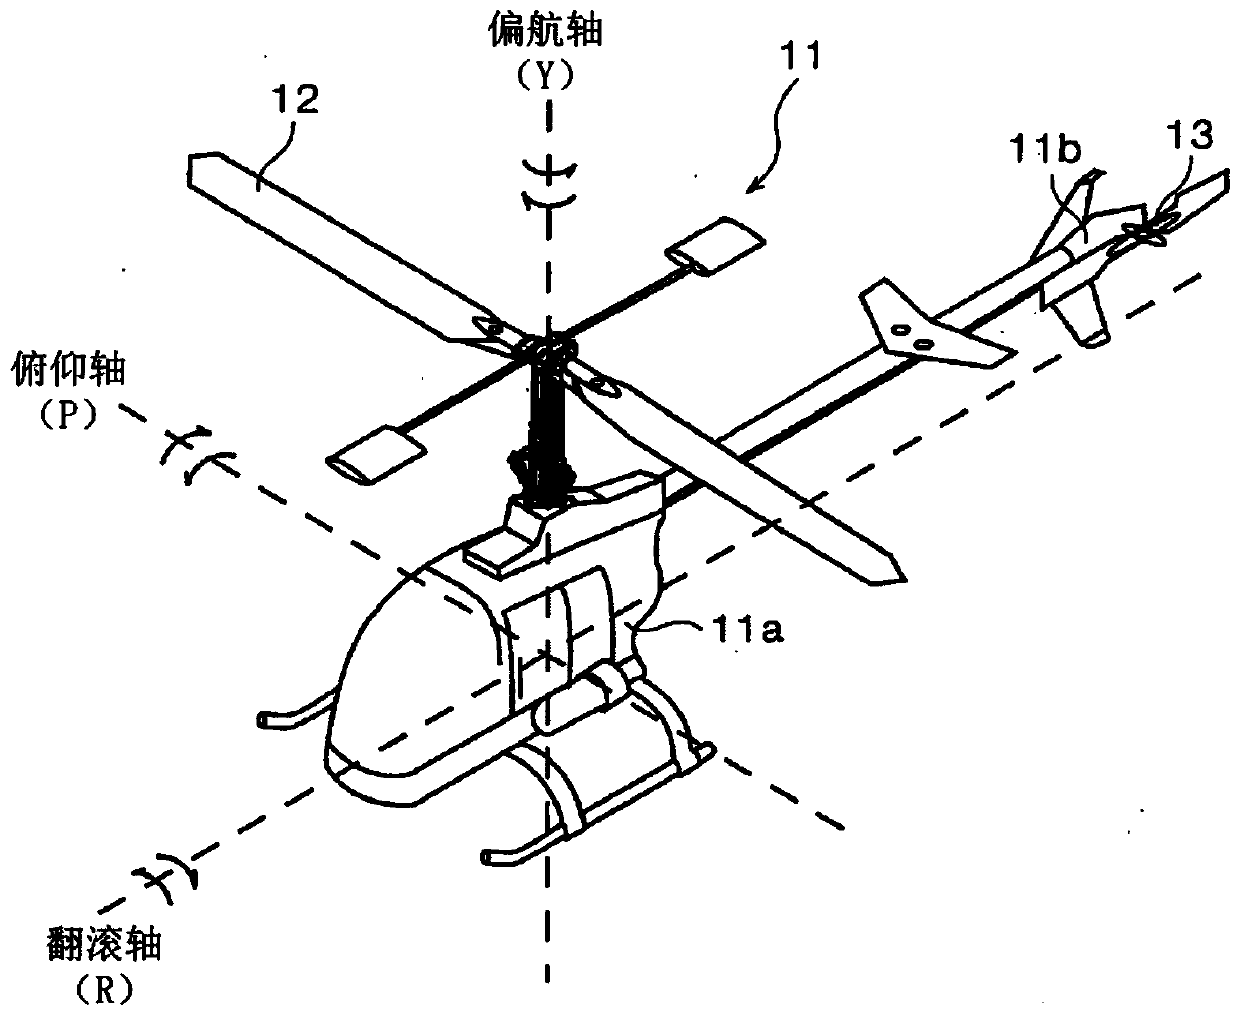 Driving control device for remote controlled helicopter